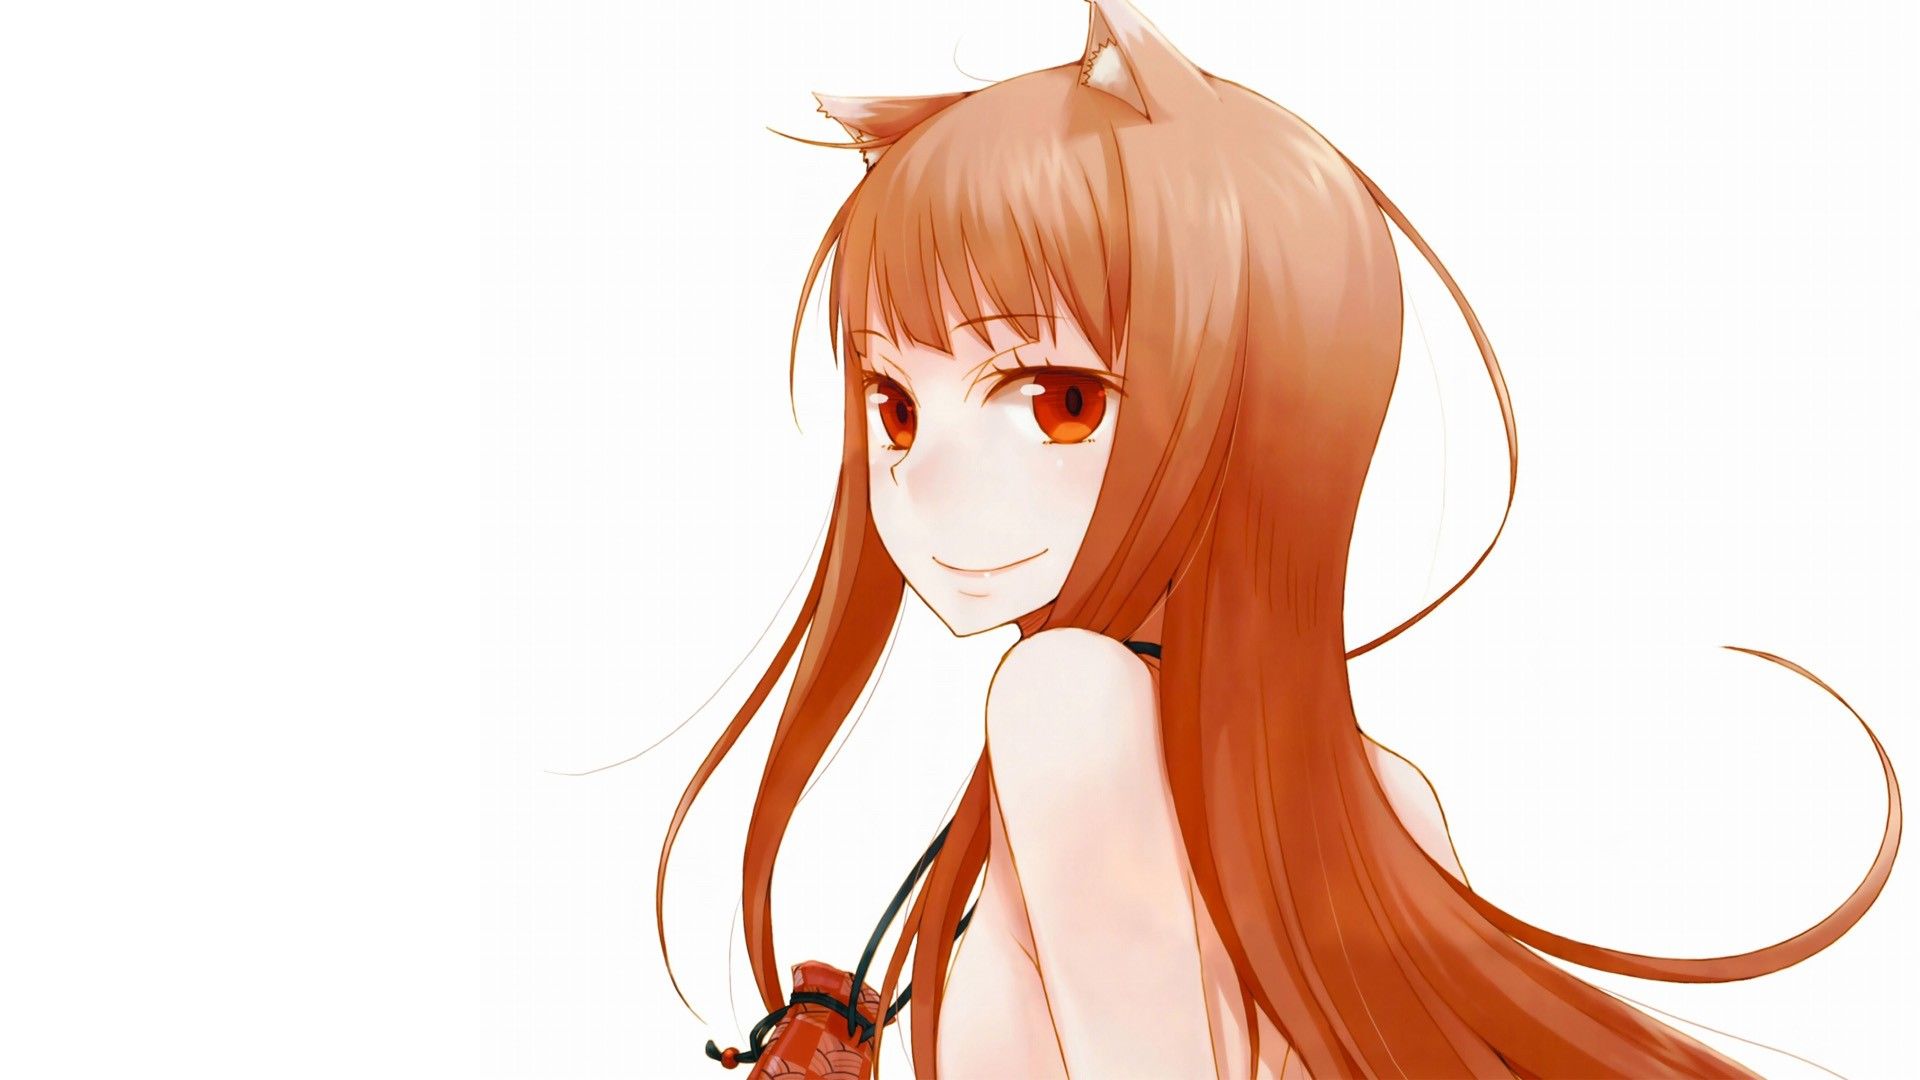 Spice and Wolf, Holo The Wise Wolf, anime girls wallpaper